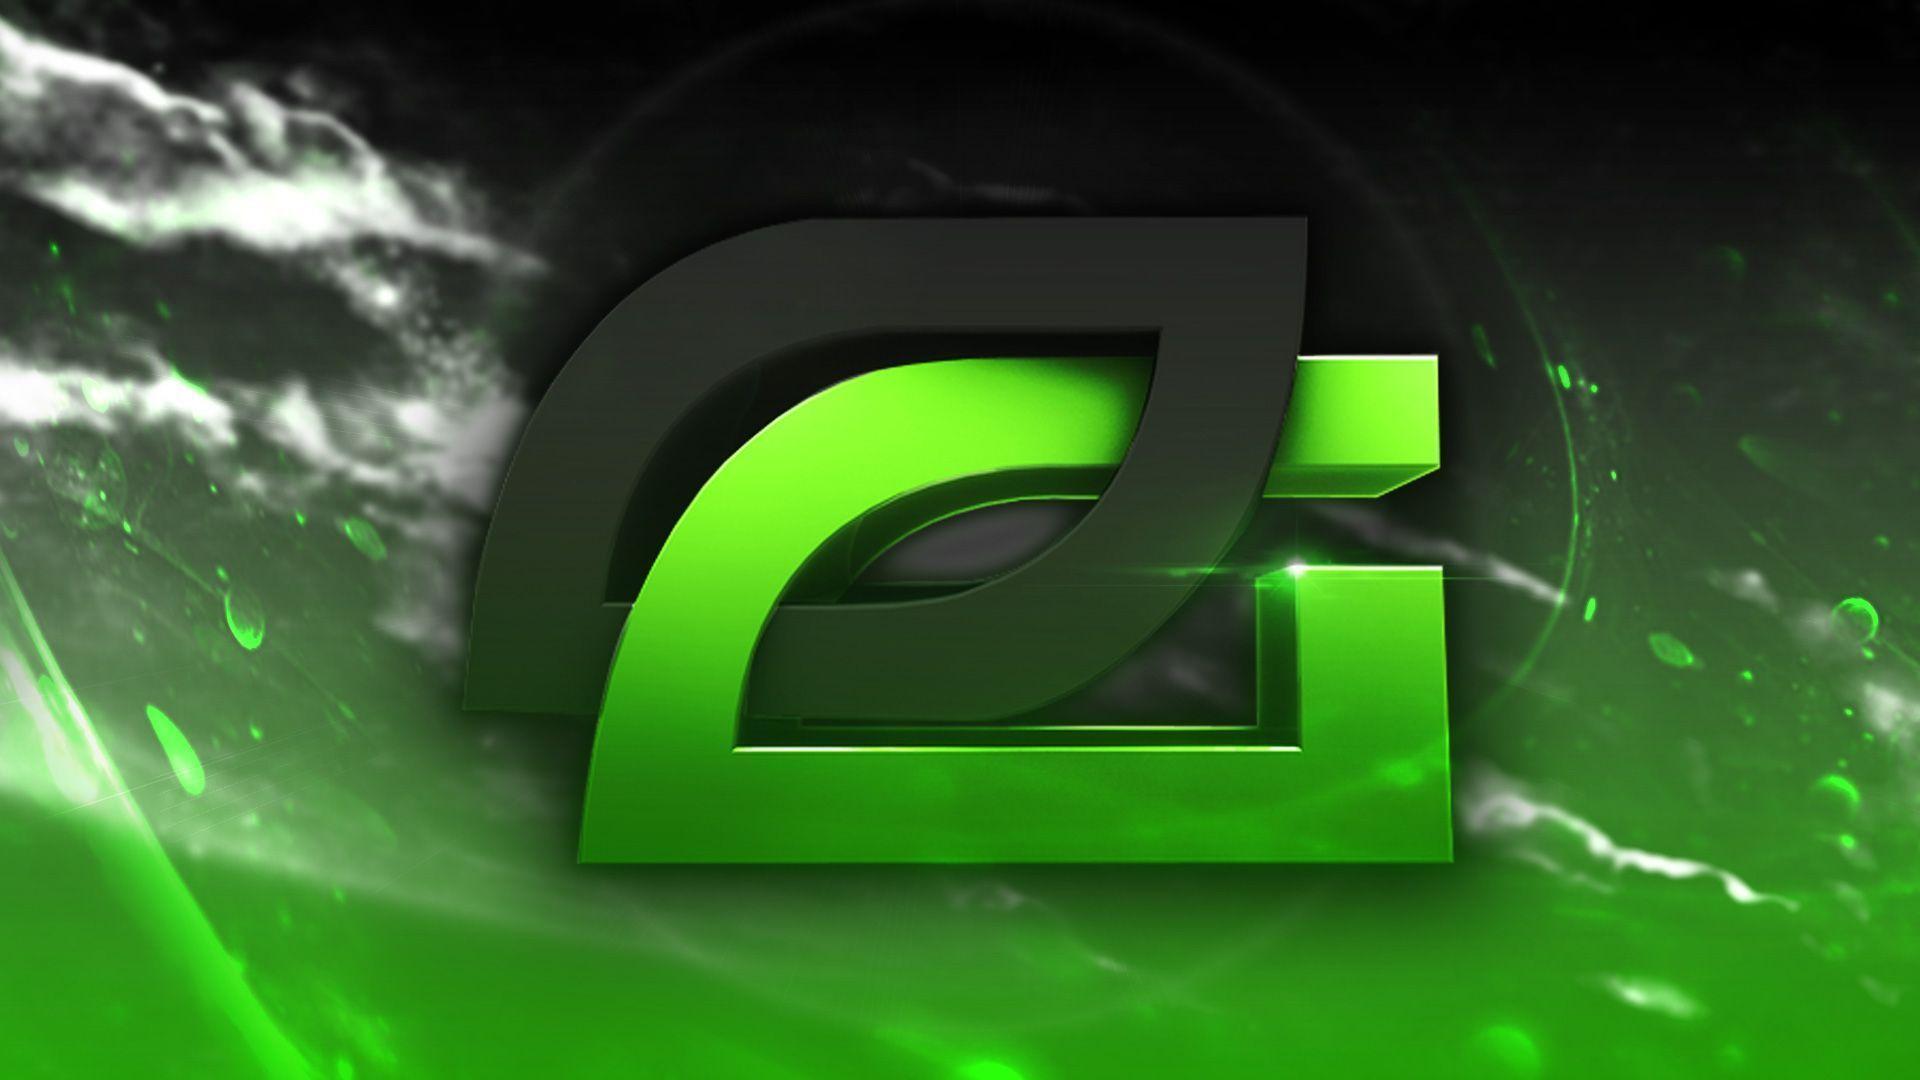 Optic Gaming wallpaper galaxy edition by FearFoxDesigns on DeviantArt